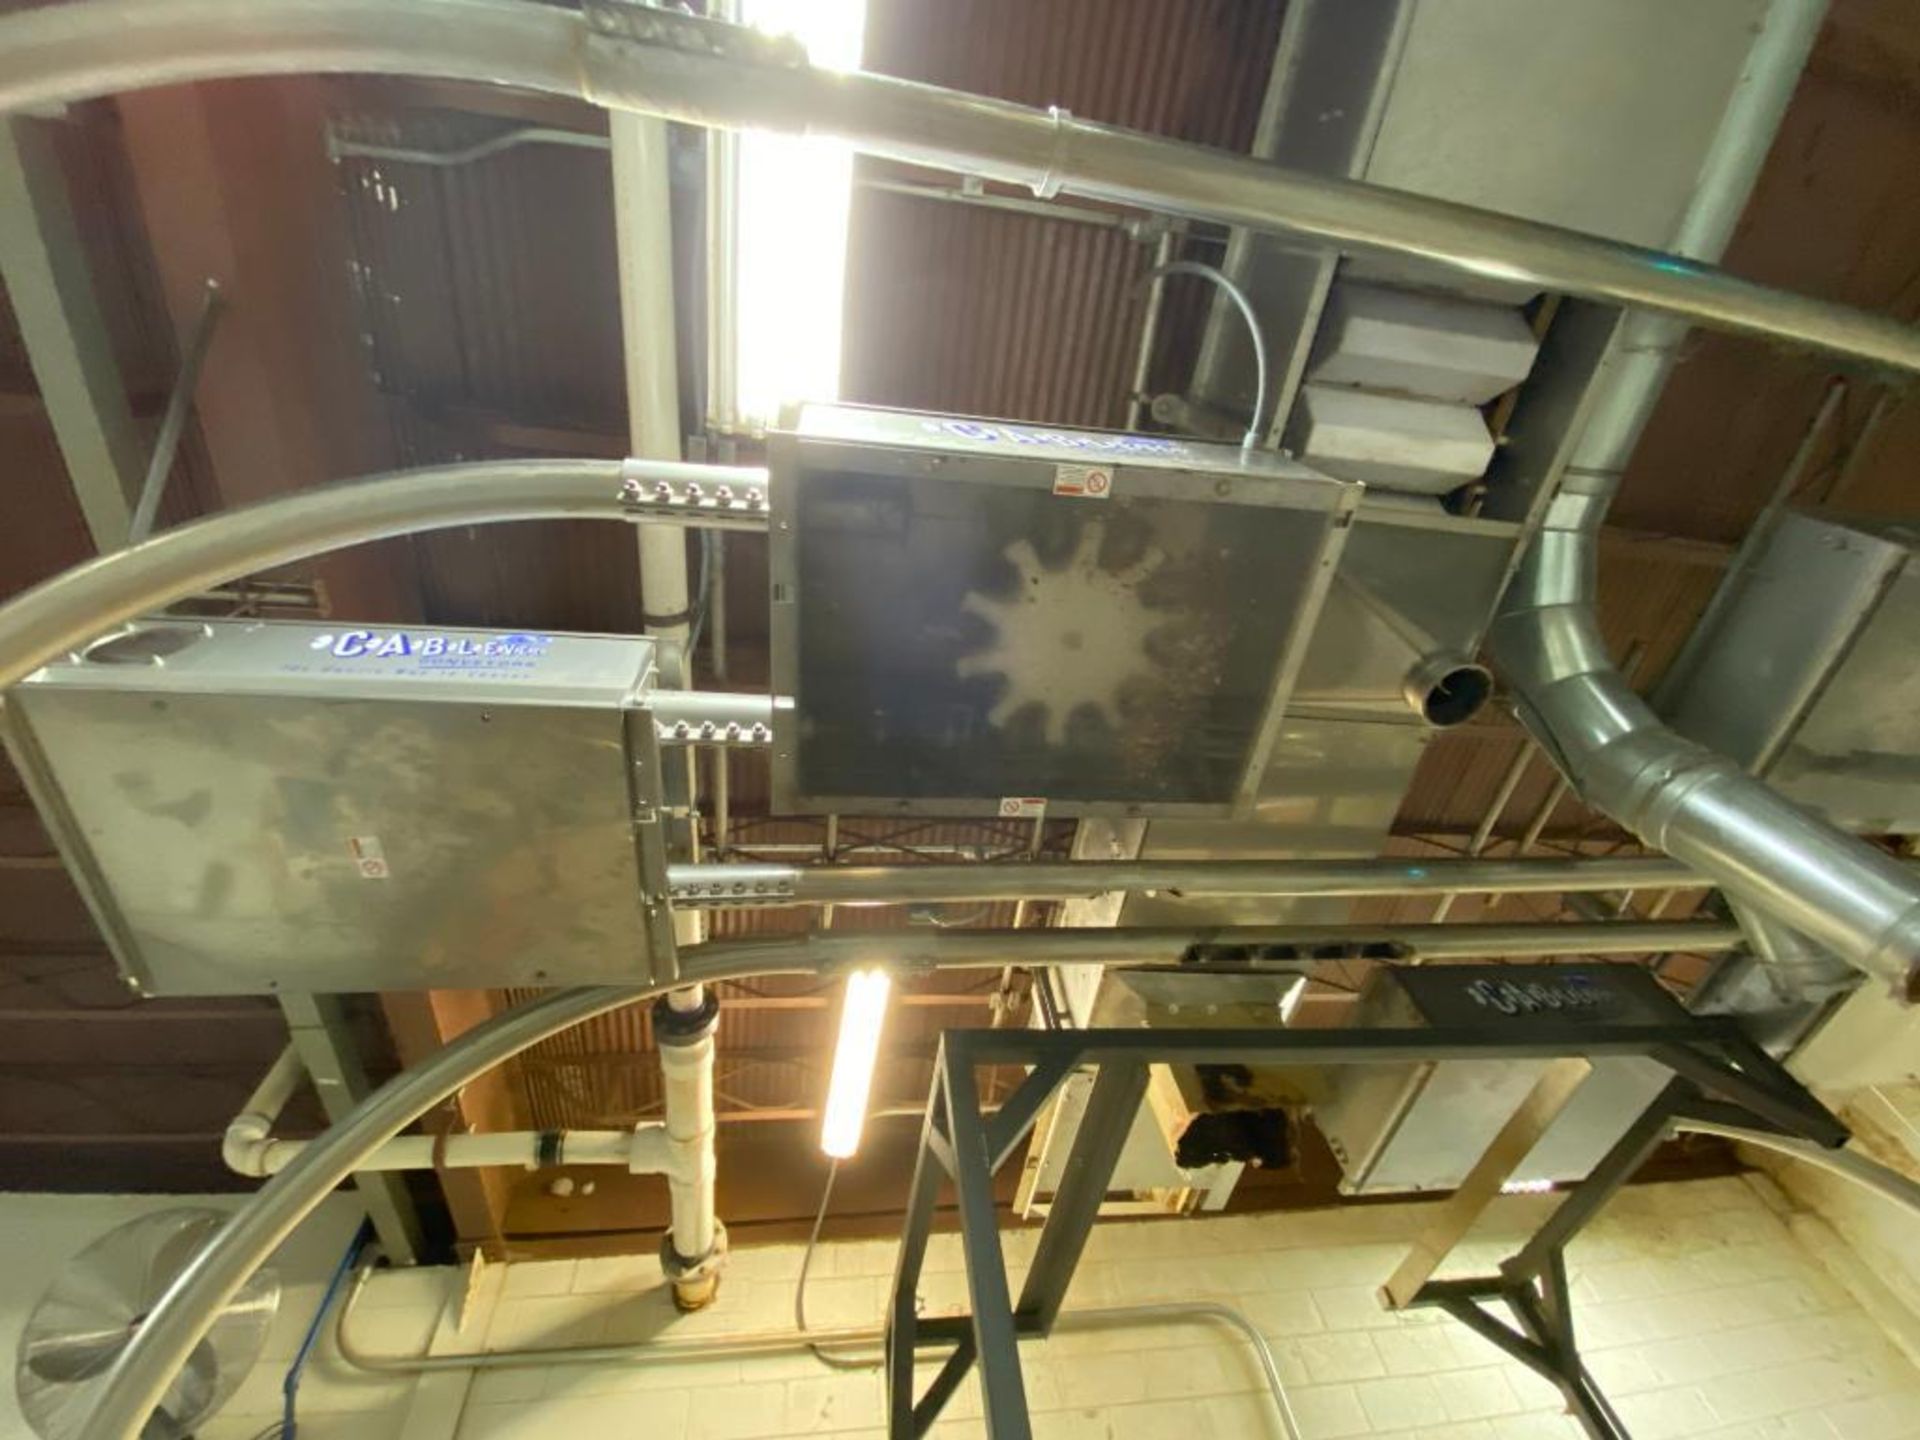 Cablevey cable conveyor, 4 in. diameter, approximately 70 ft. of stainless steel tube and cable - Image 3 of 5